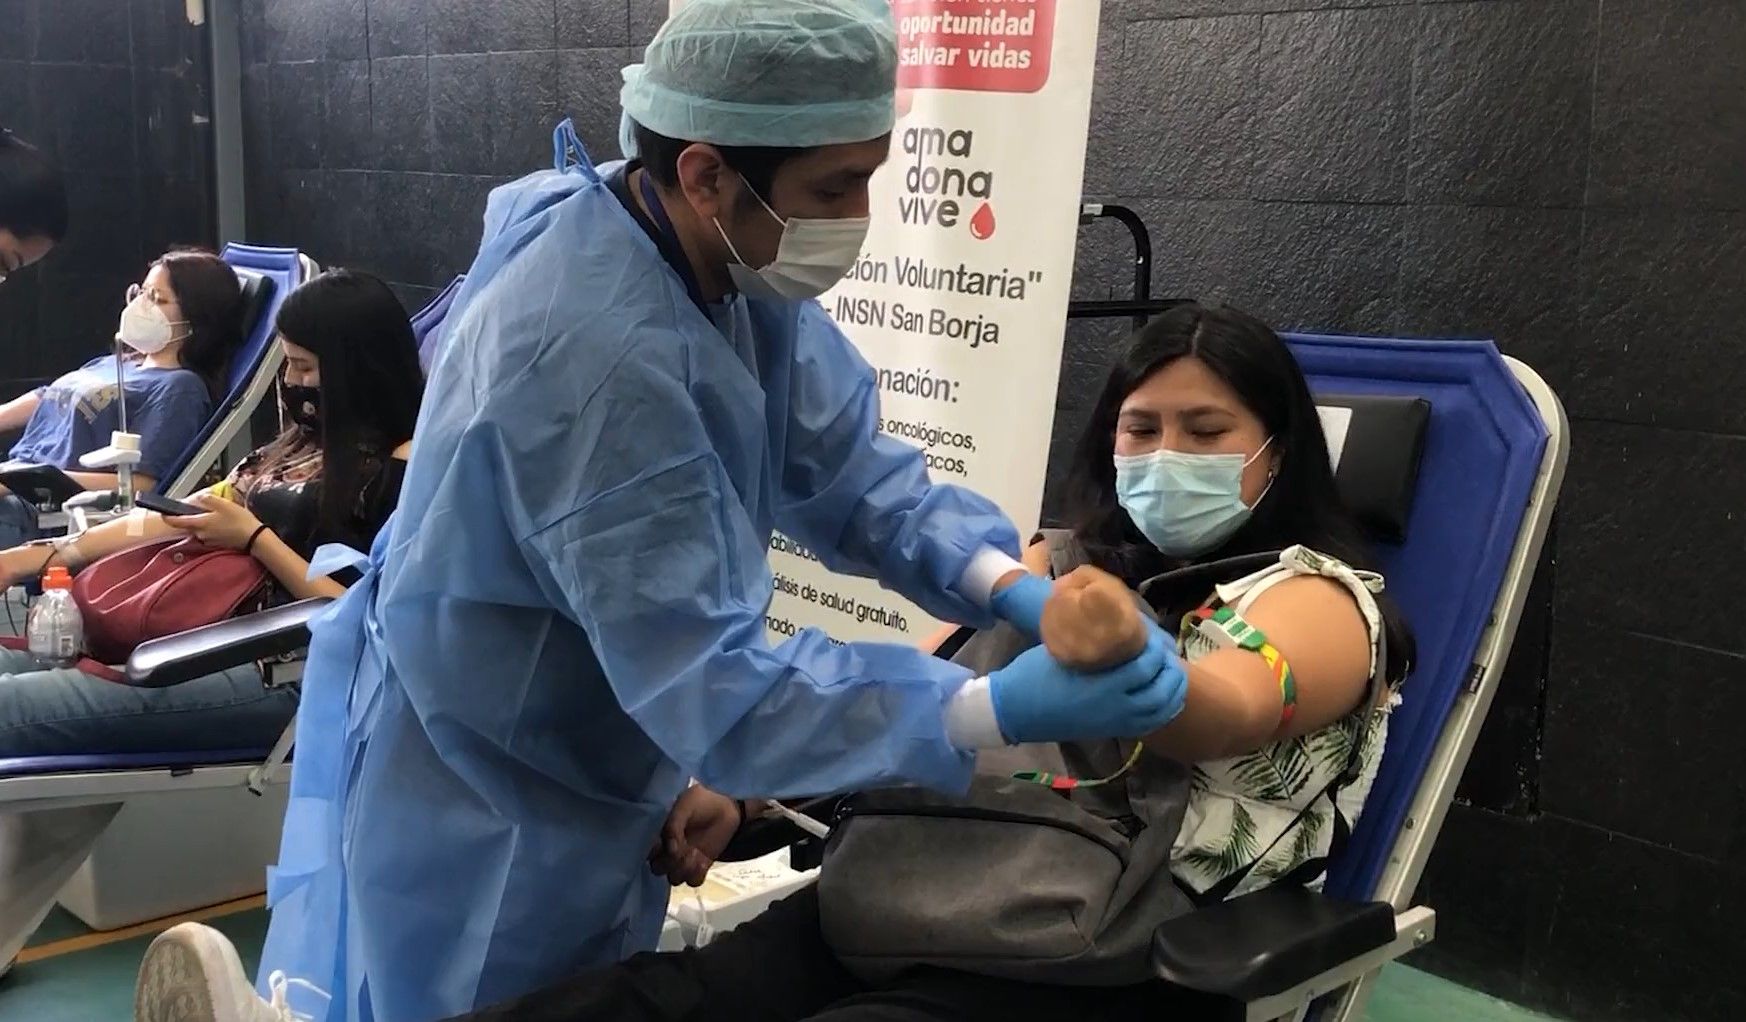 In Peru, Christian youth recruited volunteers to donate blood, to help save lives and improve the health of sick children amid COVID.